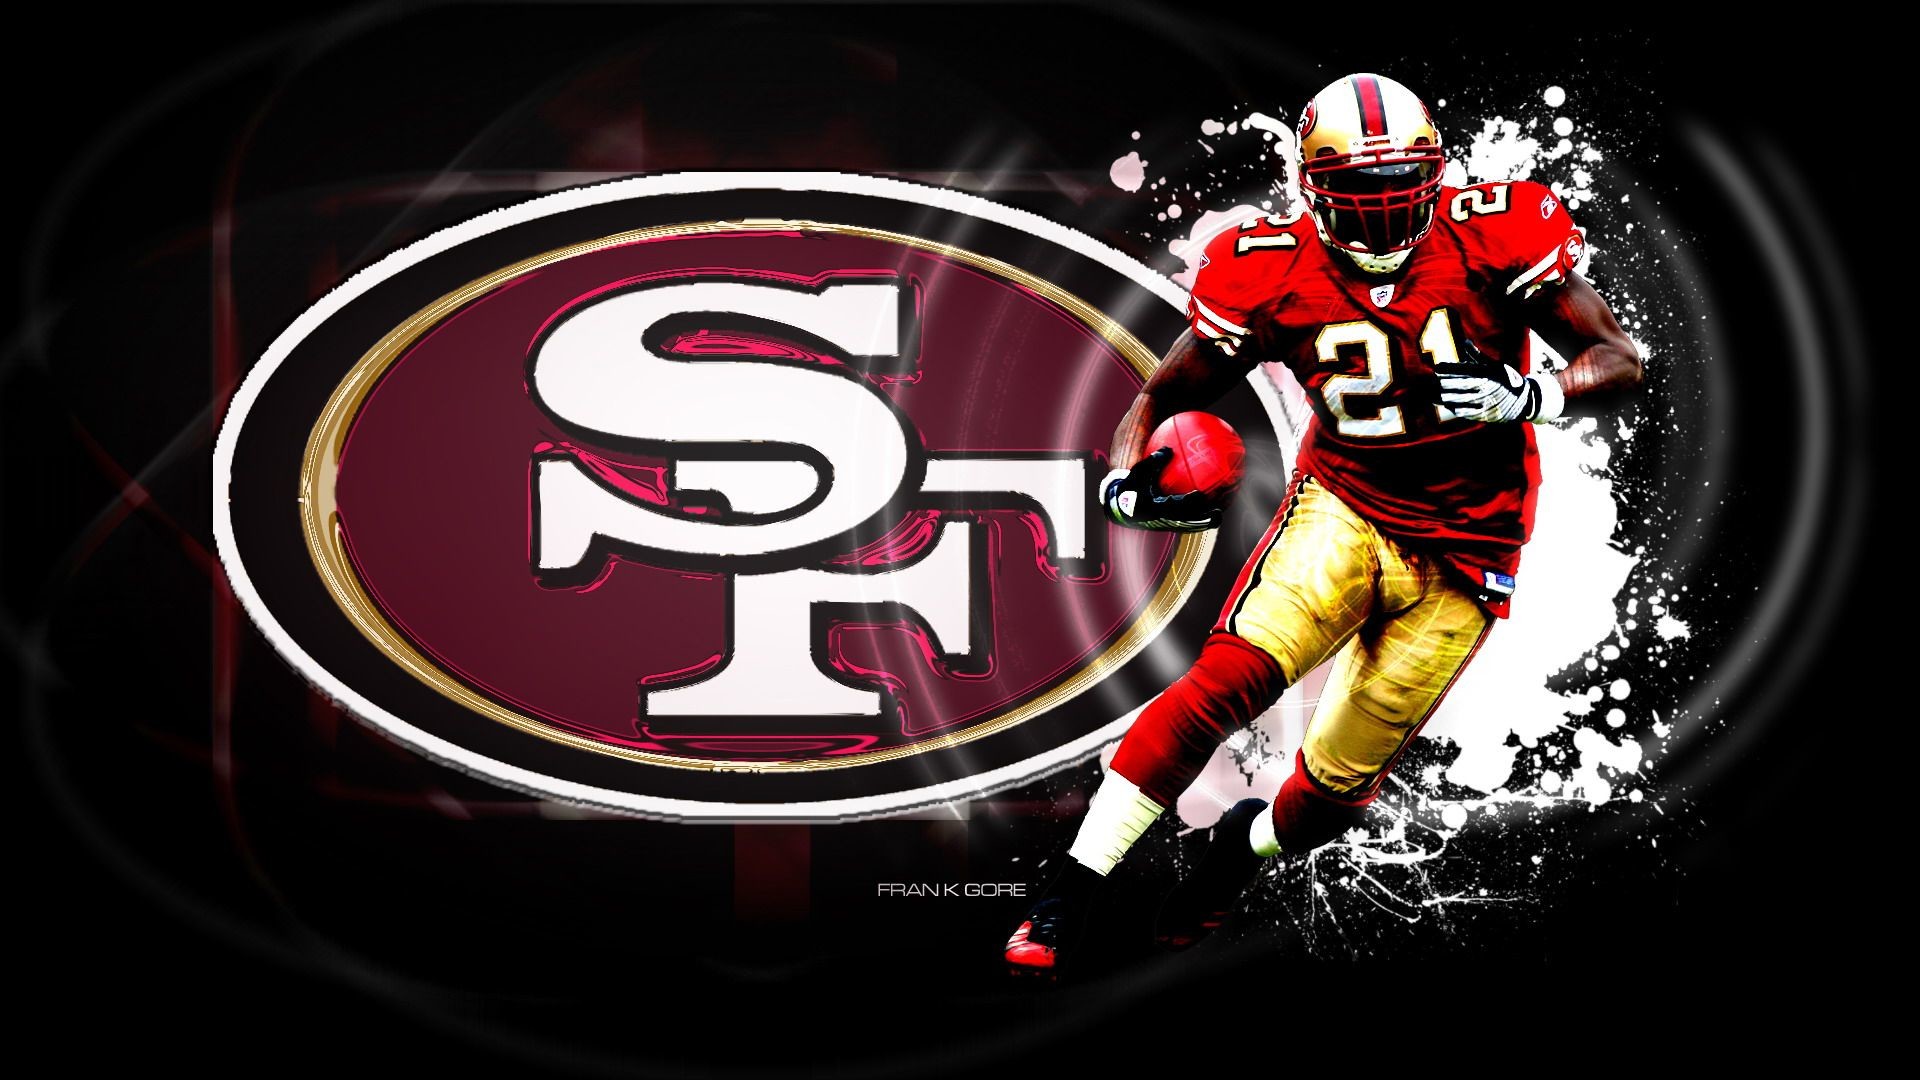 Frank Gore Wallpaper pictures